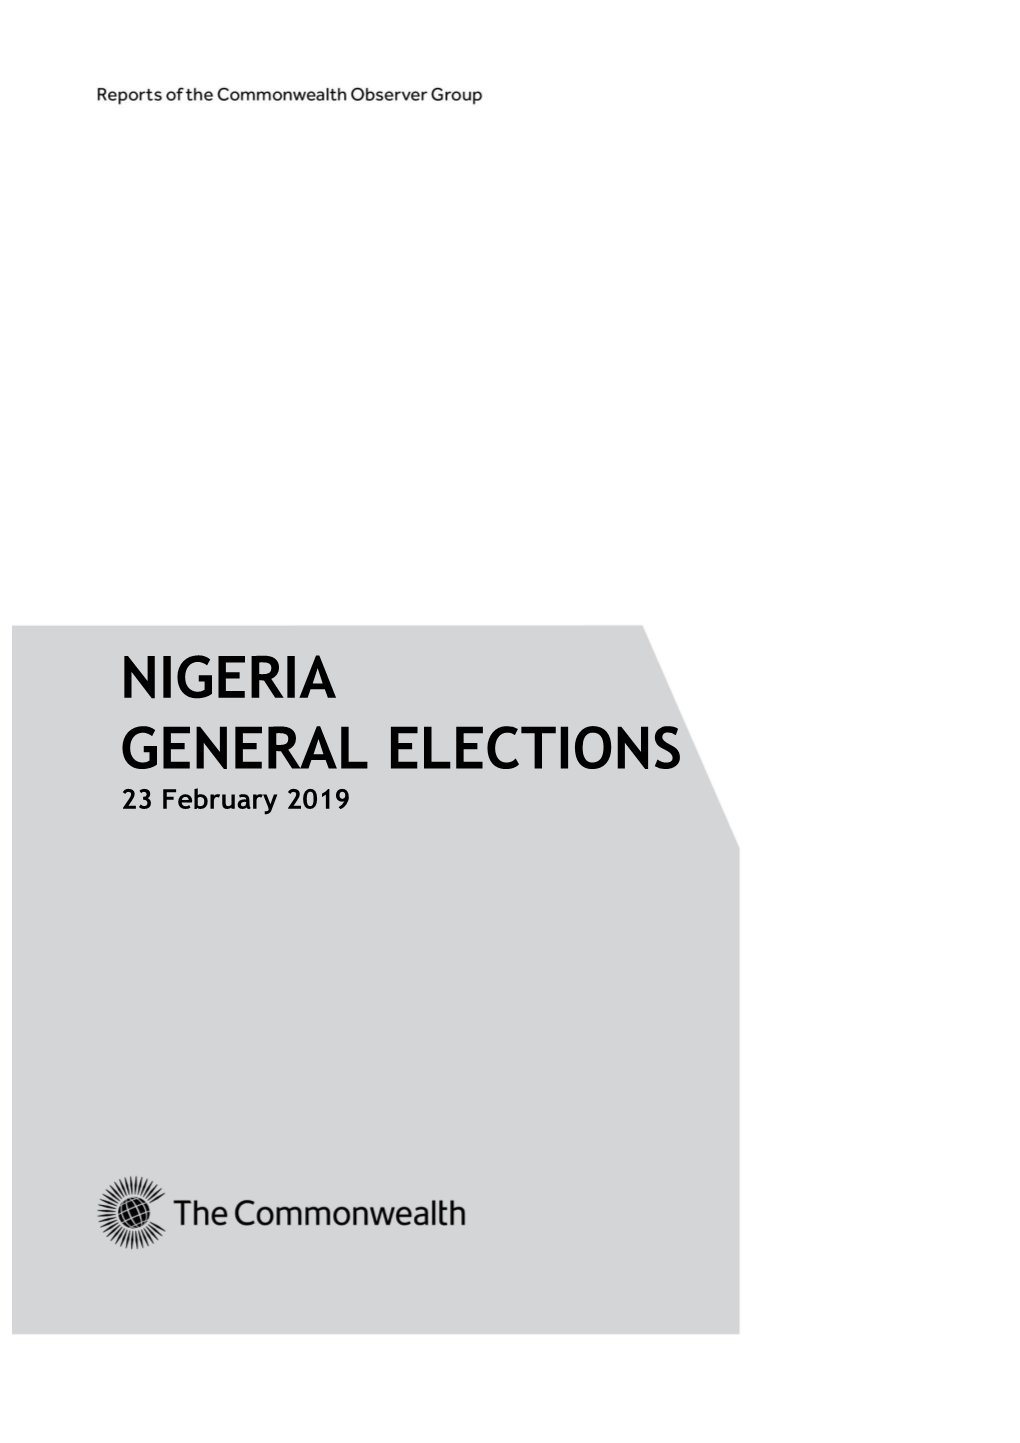 NIGERIA GENERAL ELECTIONS 23 February 2019